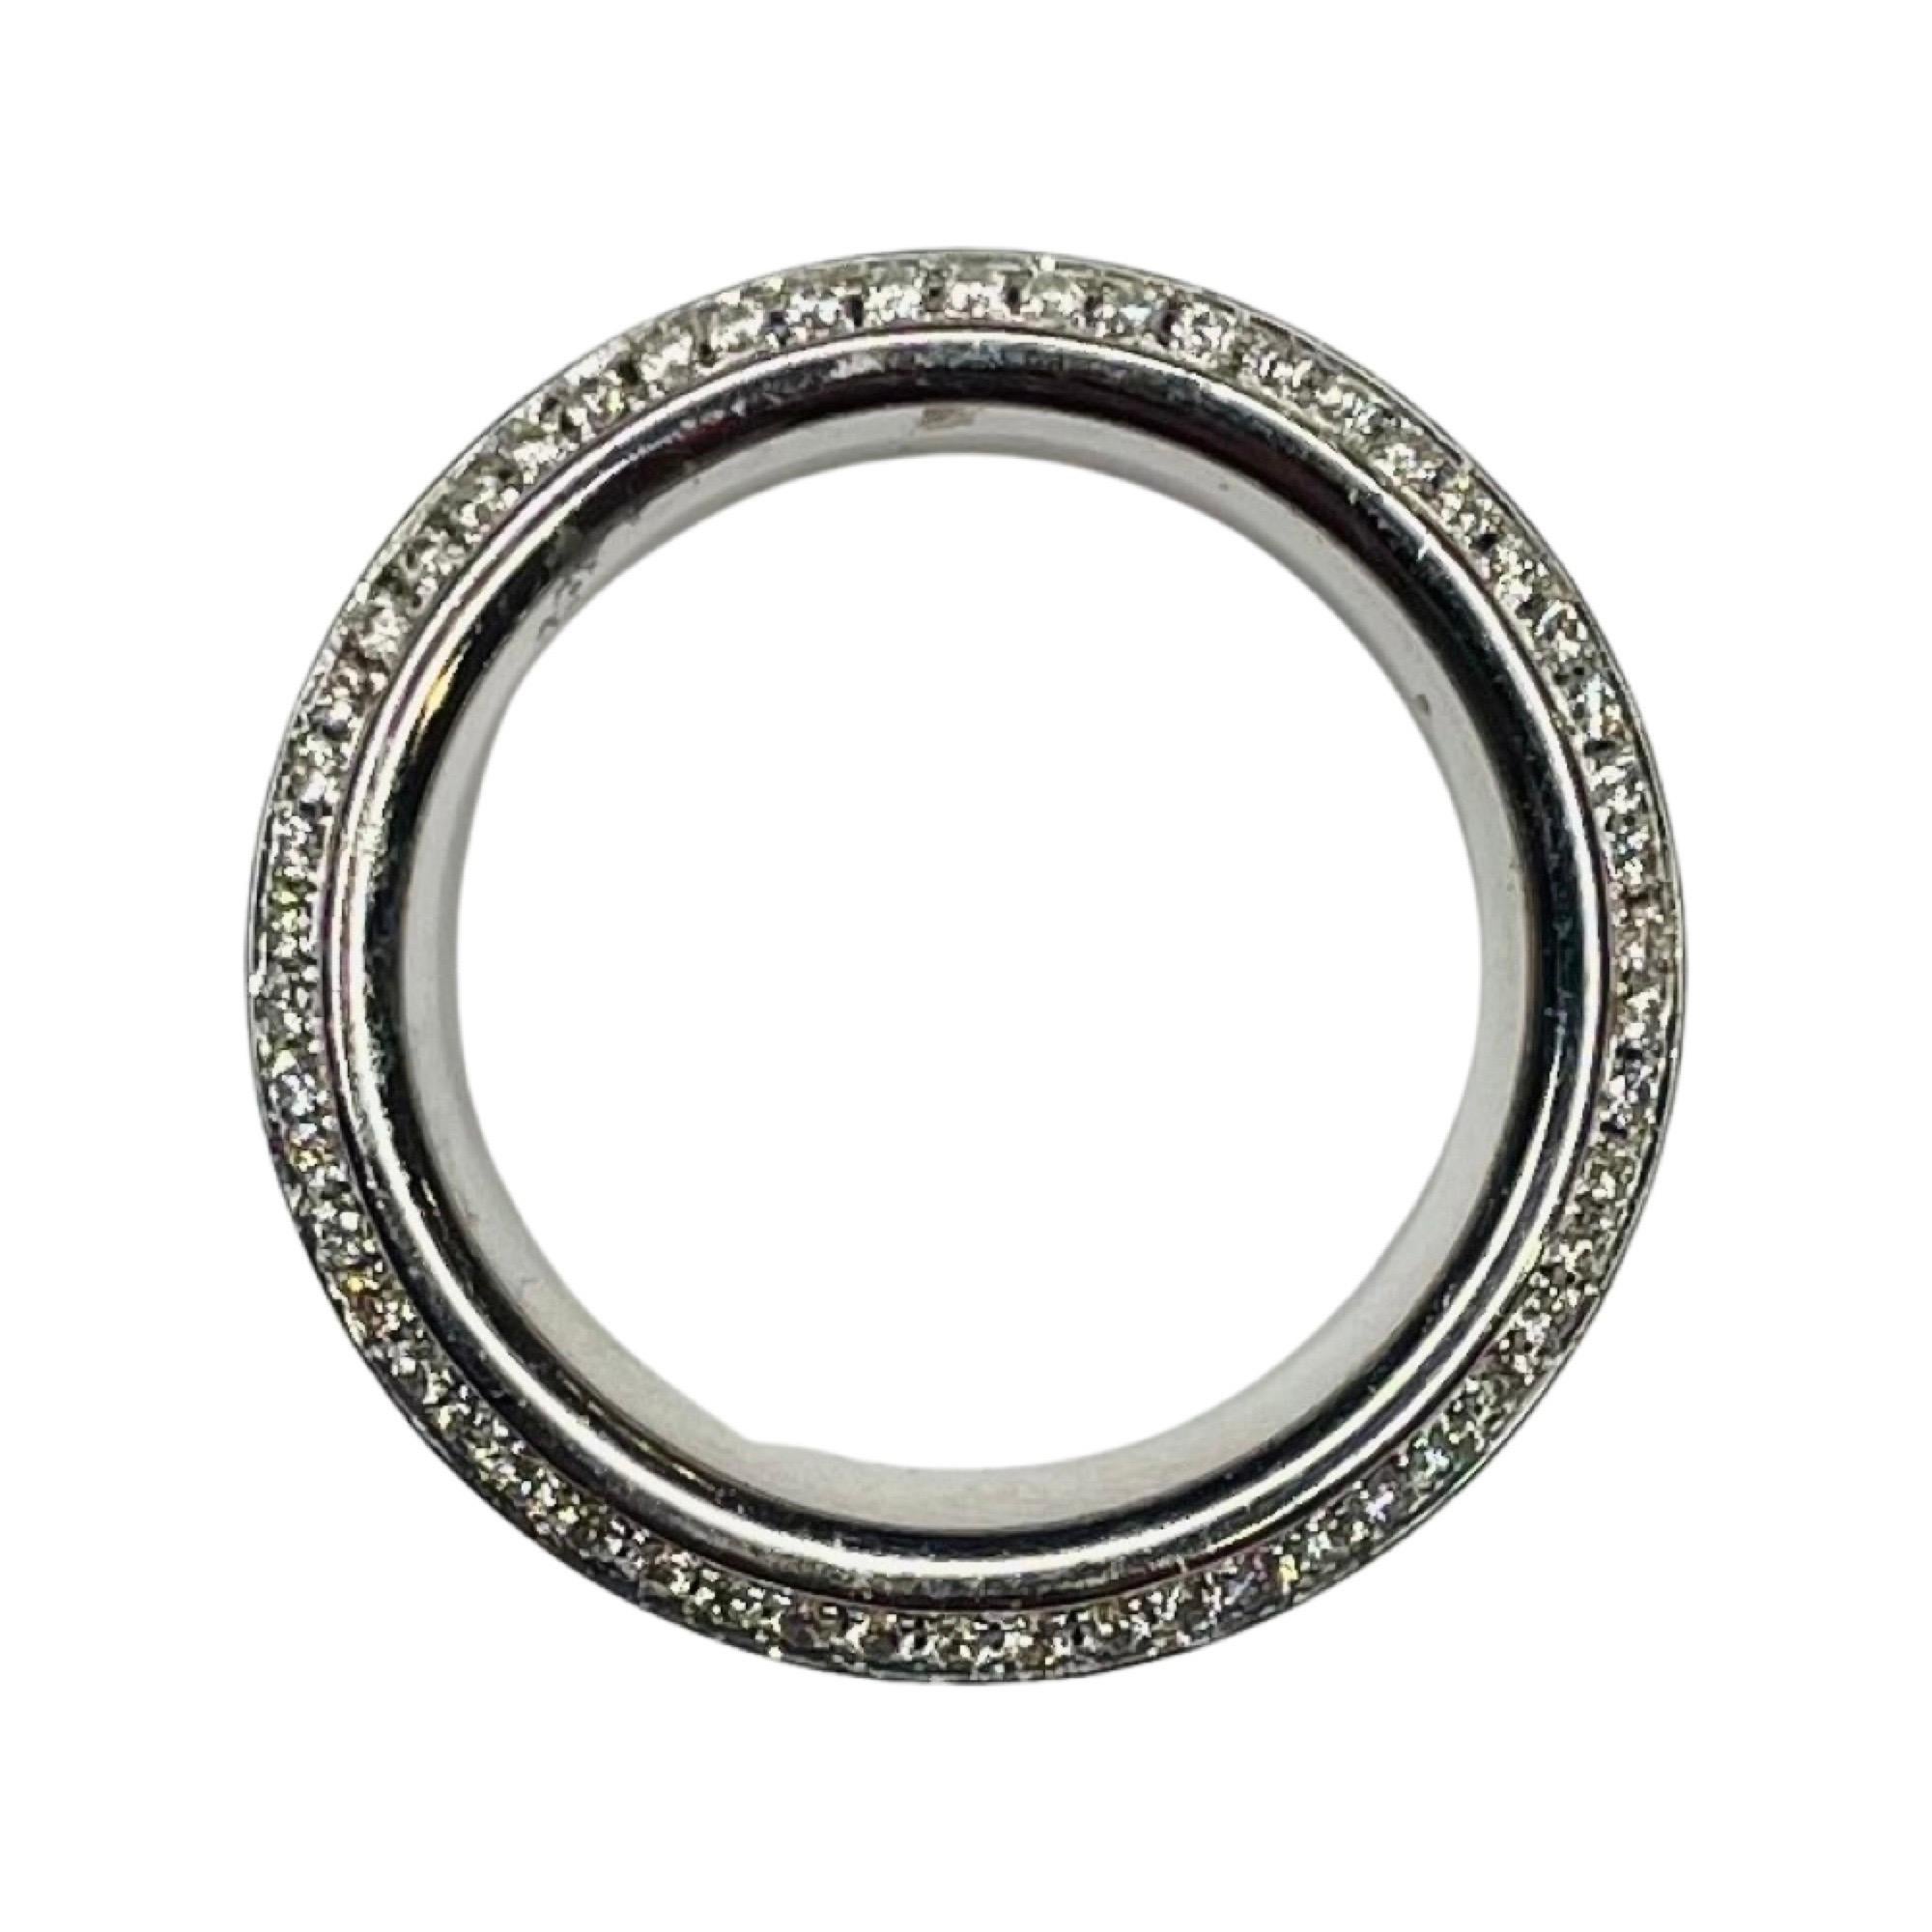 Alan Friedman 18K White Gold Sapphire and Diamond Eternity Band. There are 108 round brilliant cut diamonds of VS clarity and G color. There 0.75 carats total diamond weight. There are 123 diamond cut natural sapphires weighing 3.30 carats. The